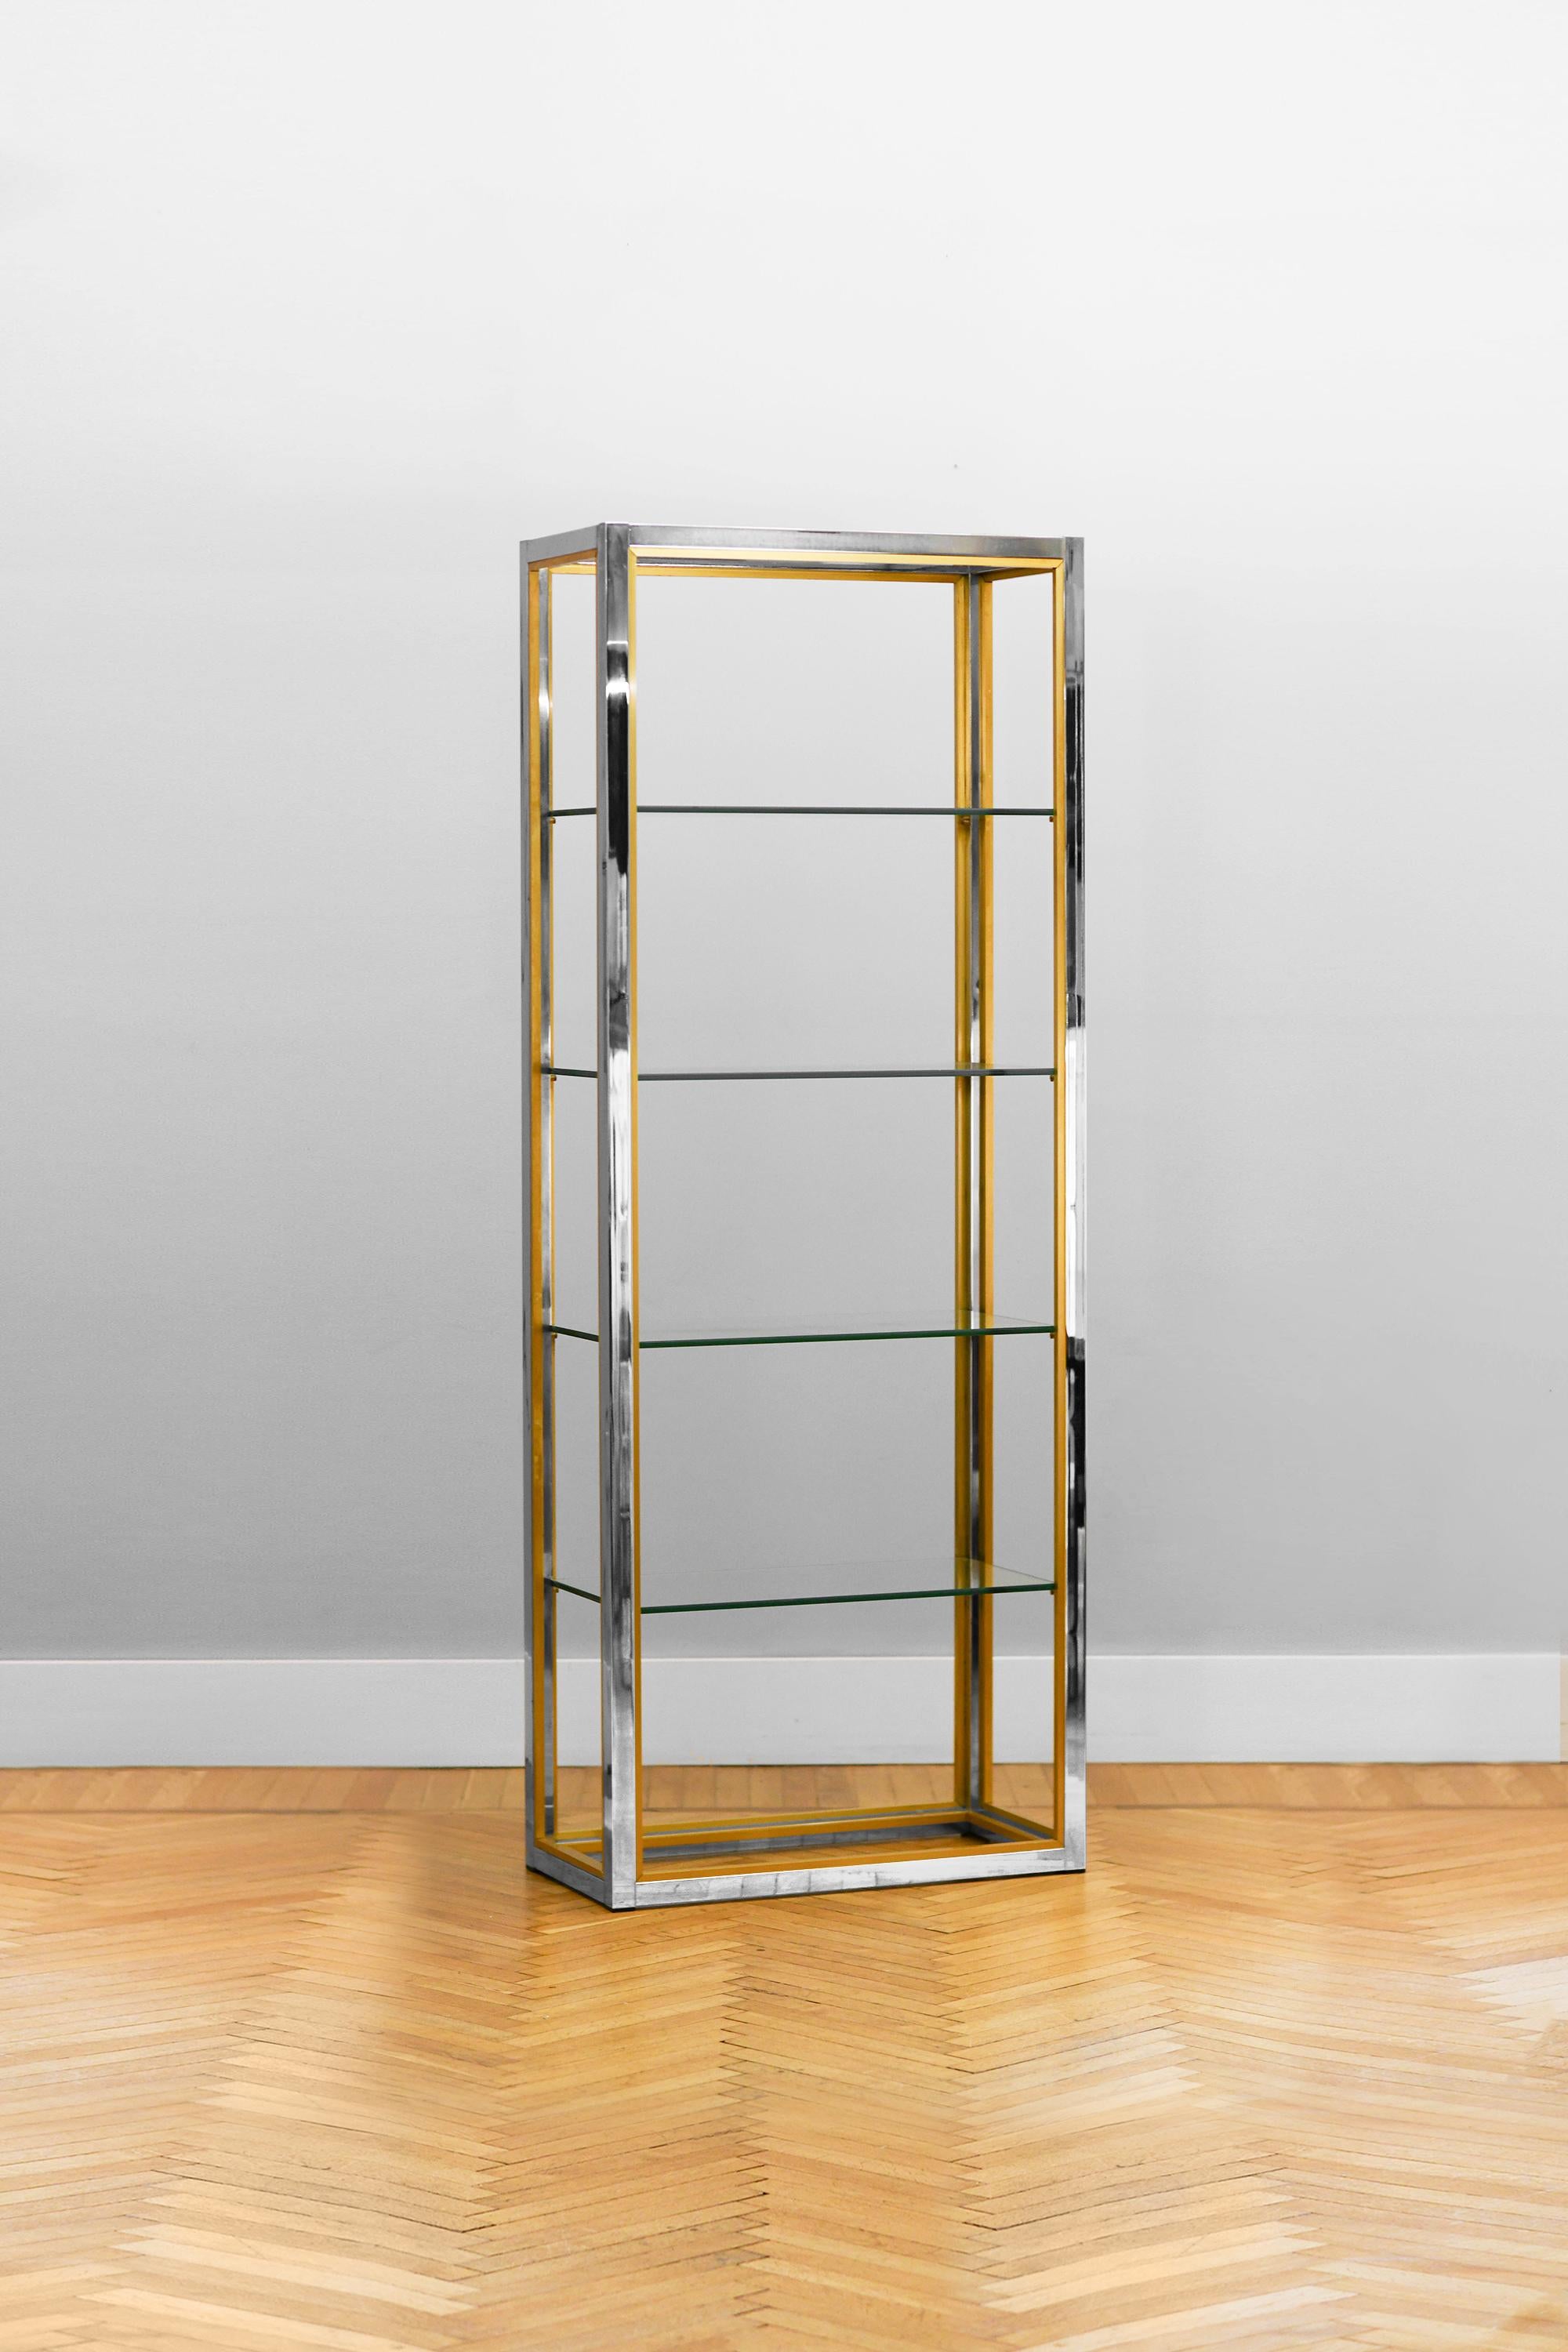 Brass and chromed metal bookcase with glass shelves
Product details
Single bookcase dimensions: 77 W x 200 H x 37 D cm
Italian production 1980s
1 bookcase available